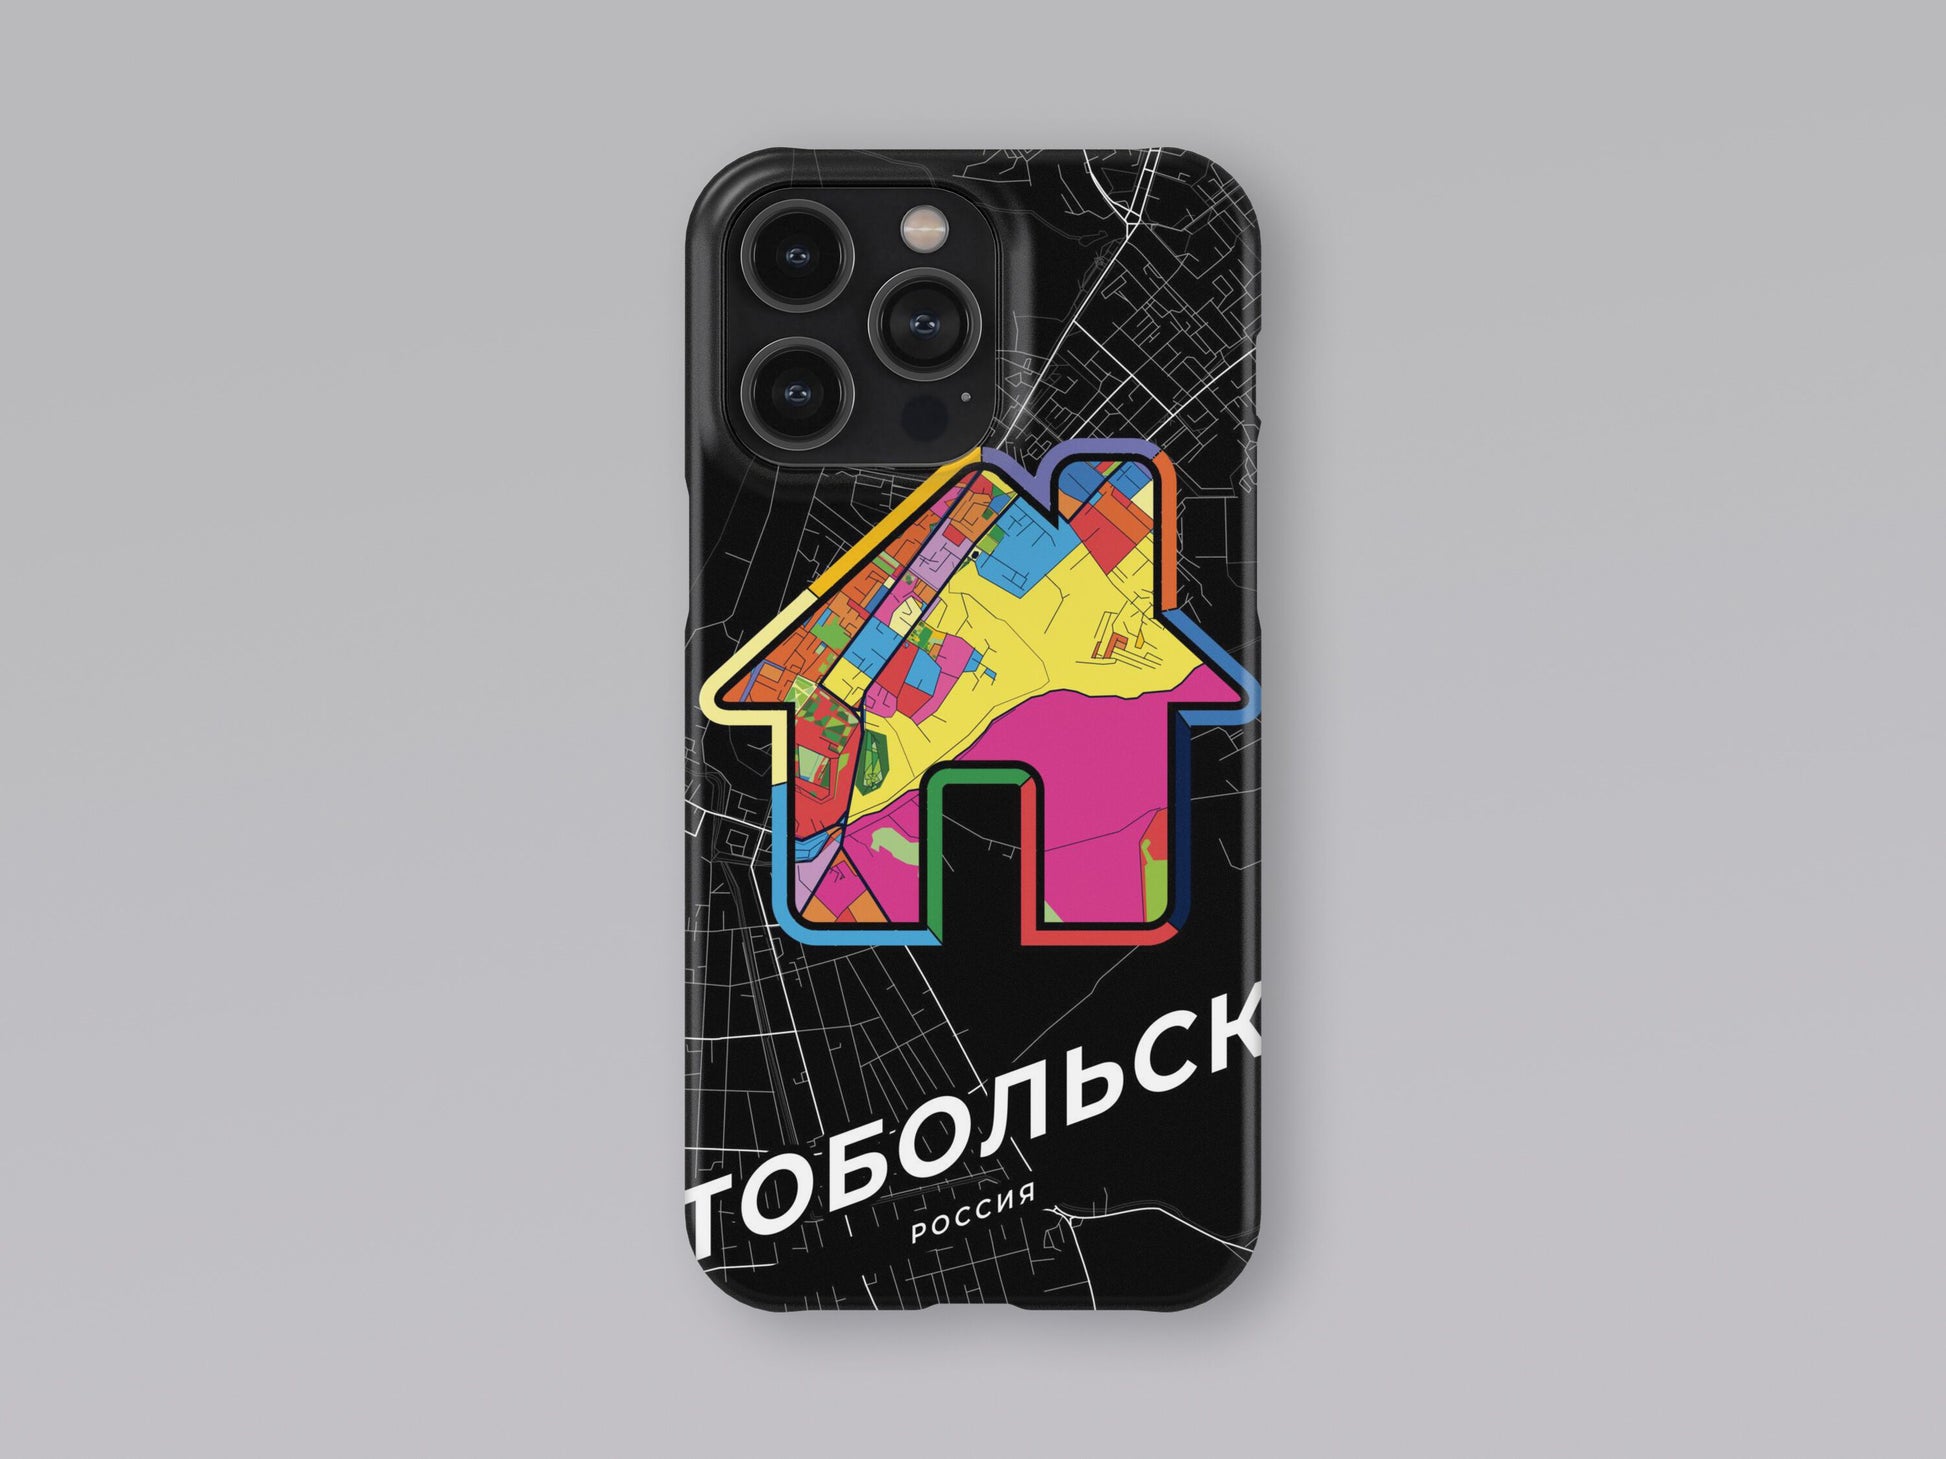 Tobolsk Russia slim phone case with colorful icon 3